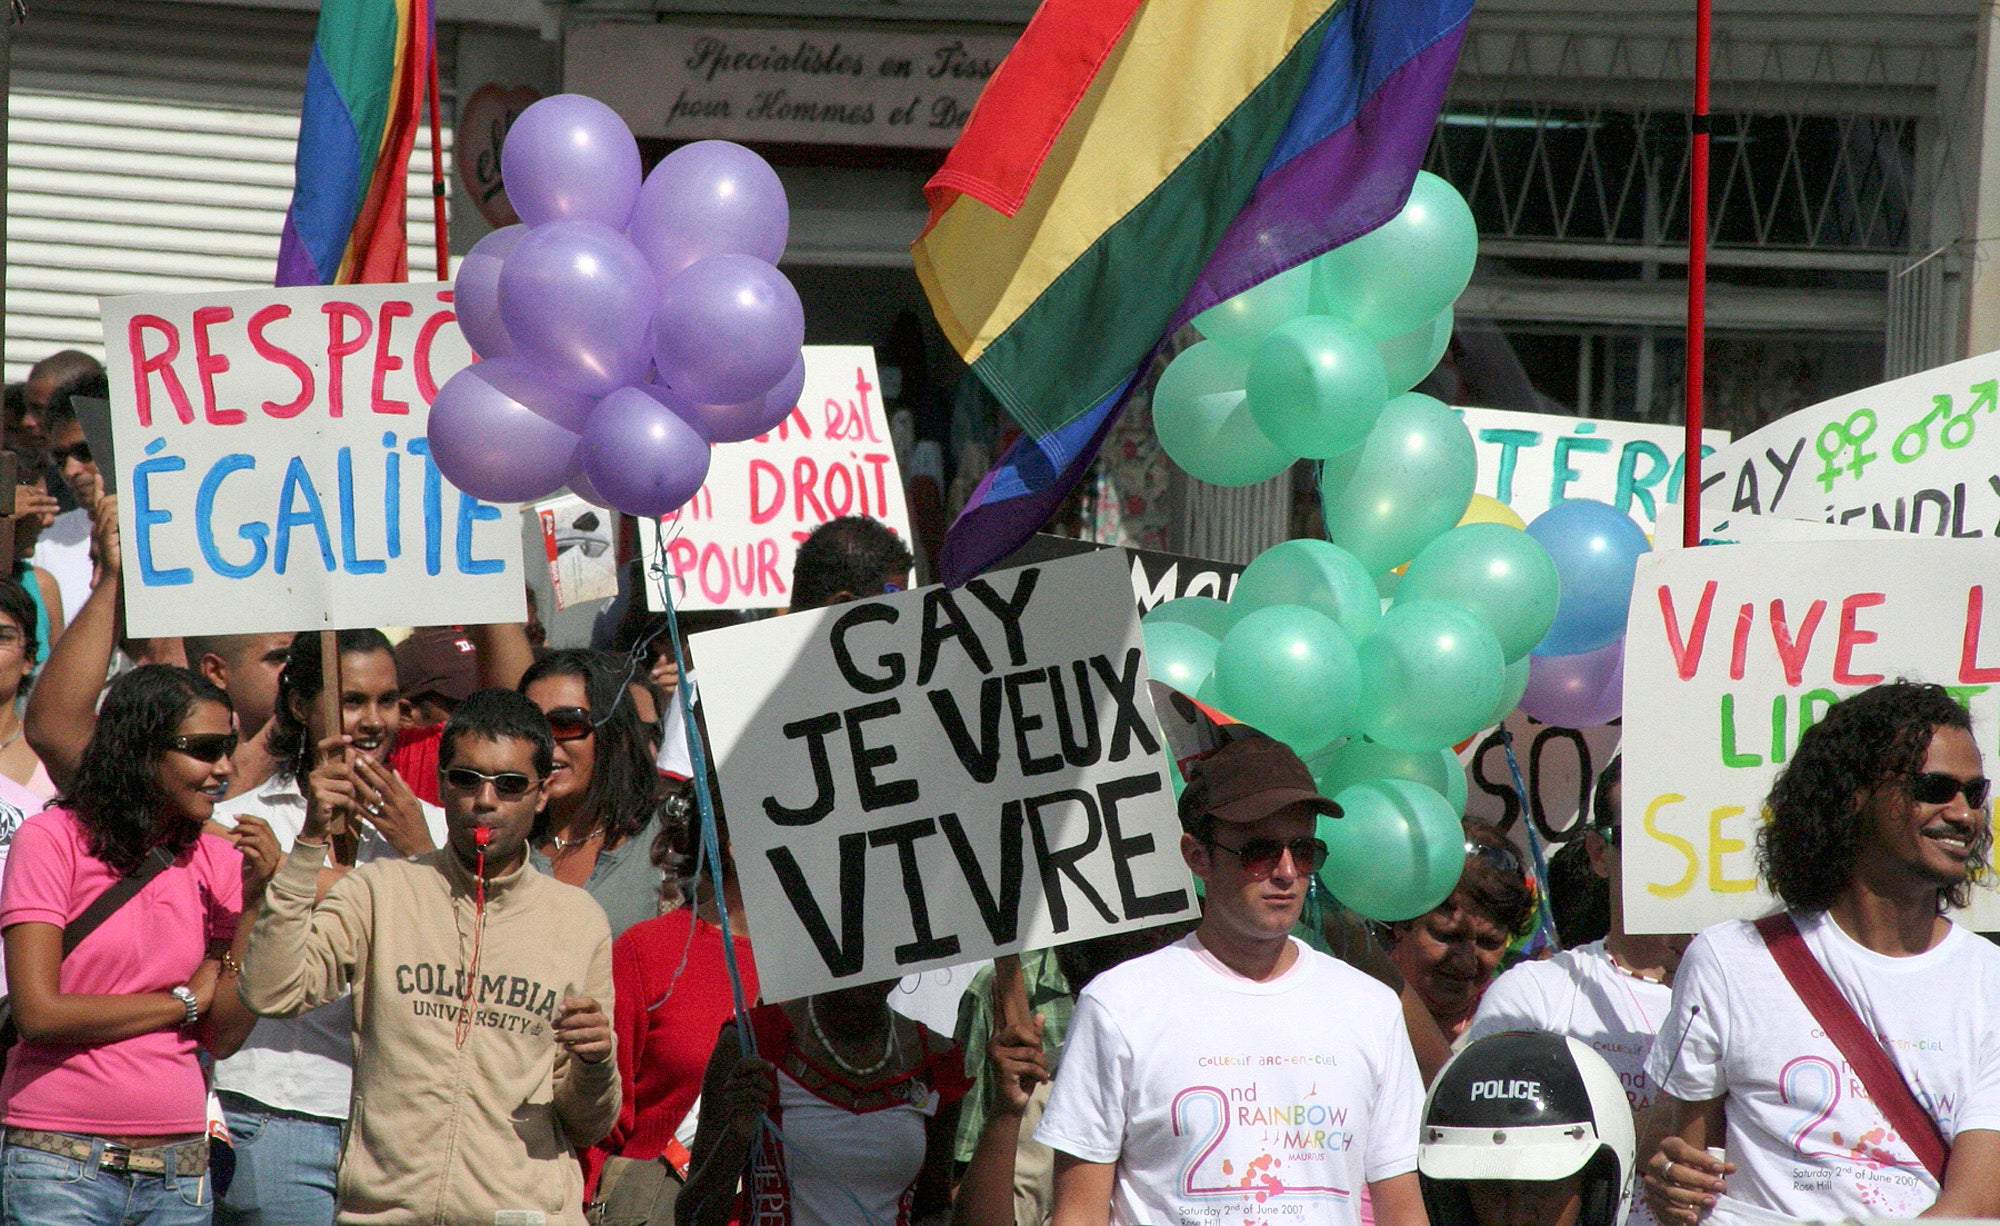 A march for the rights of LGBT people and gender equality in the town of Rose Hill, Mauritius, June 2, 2007.